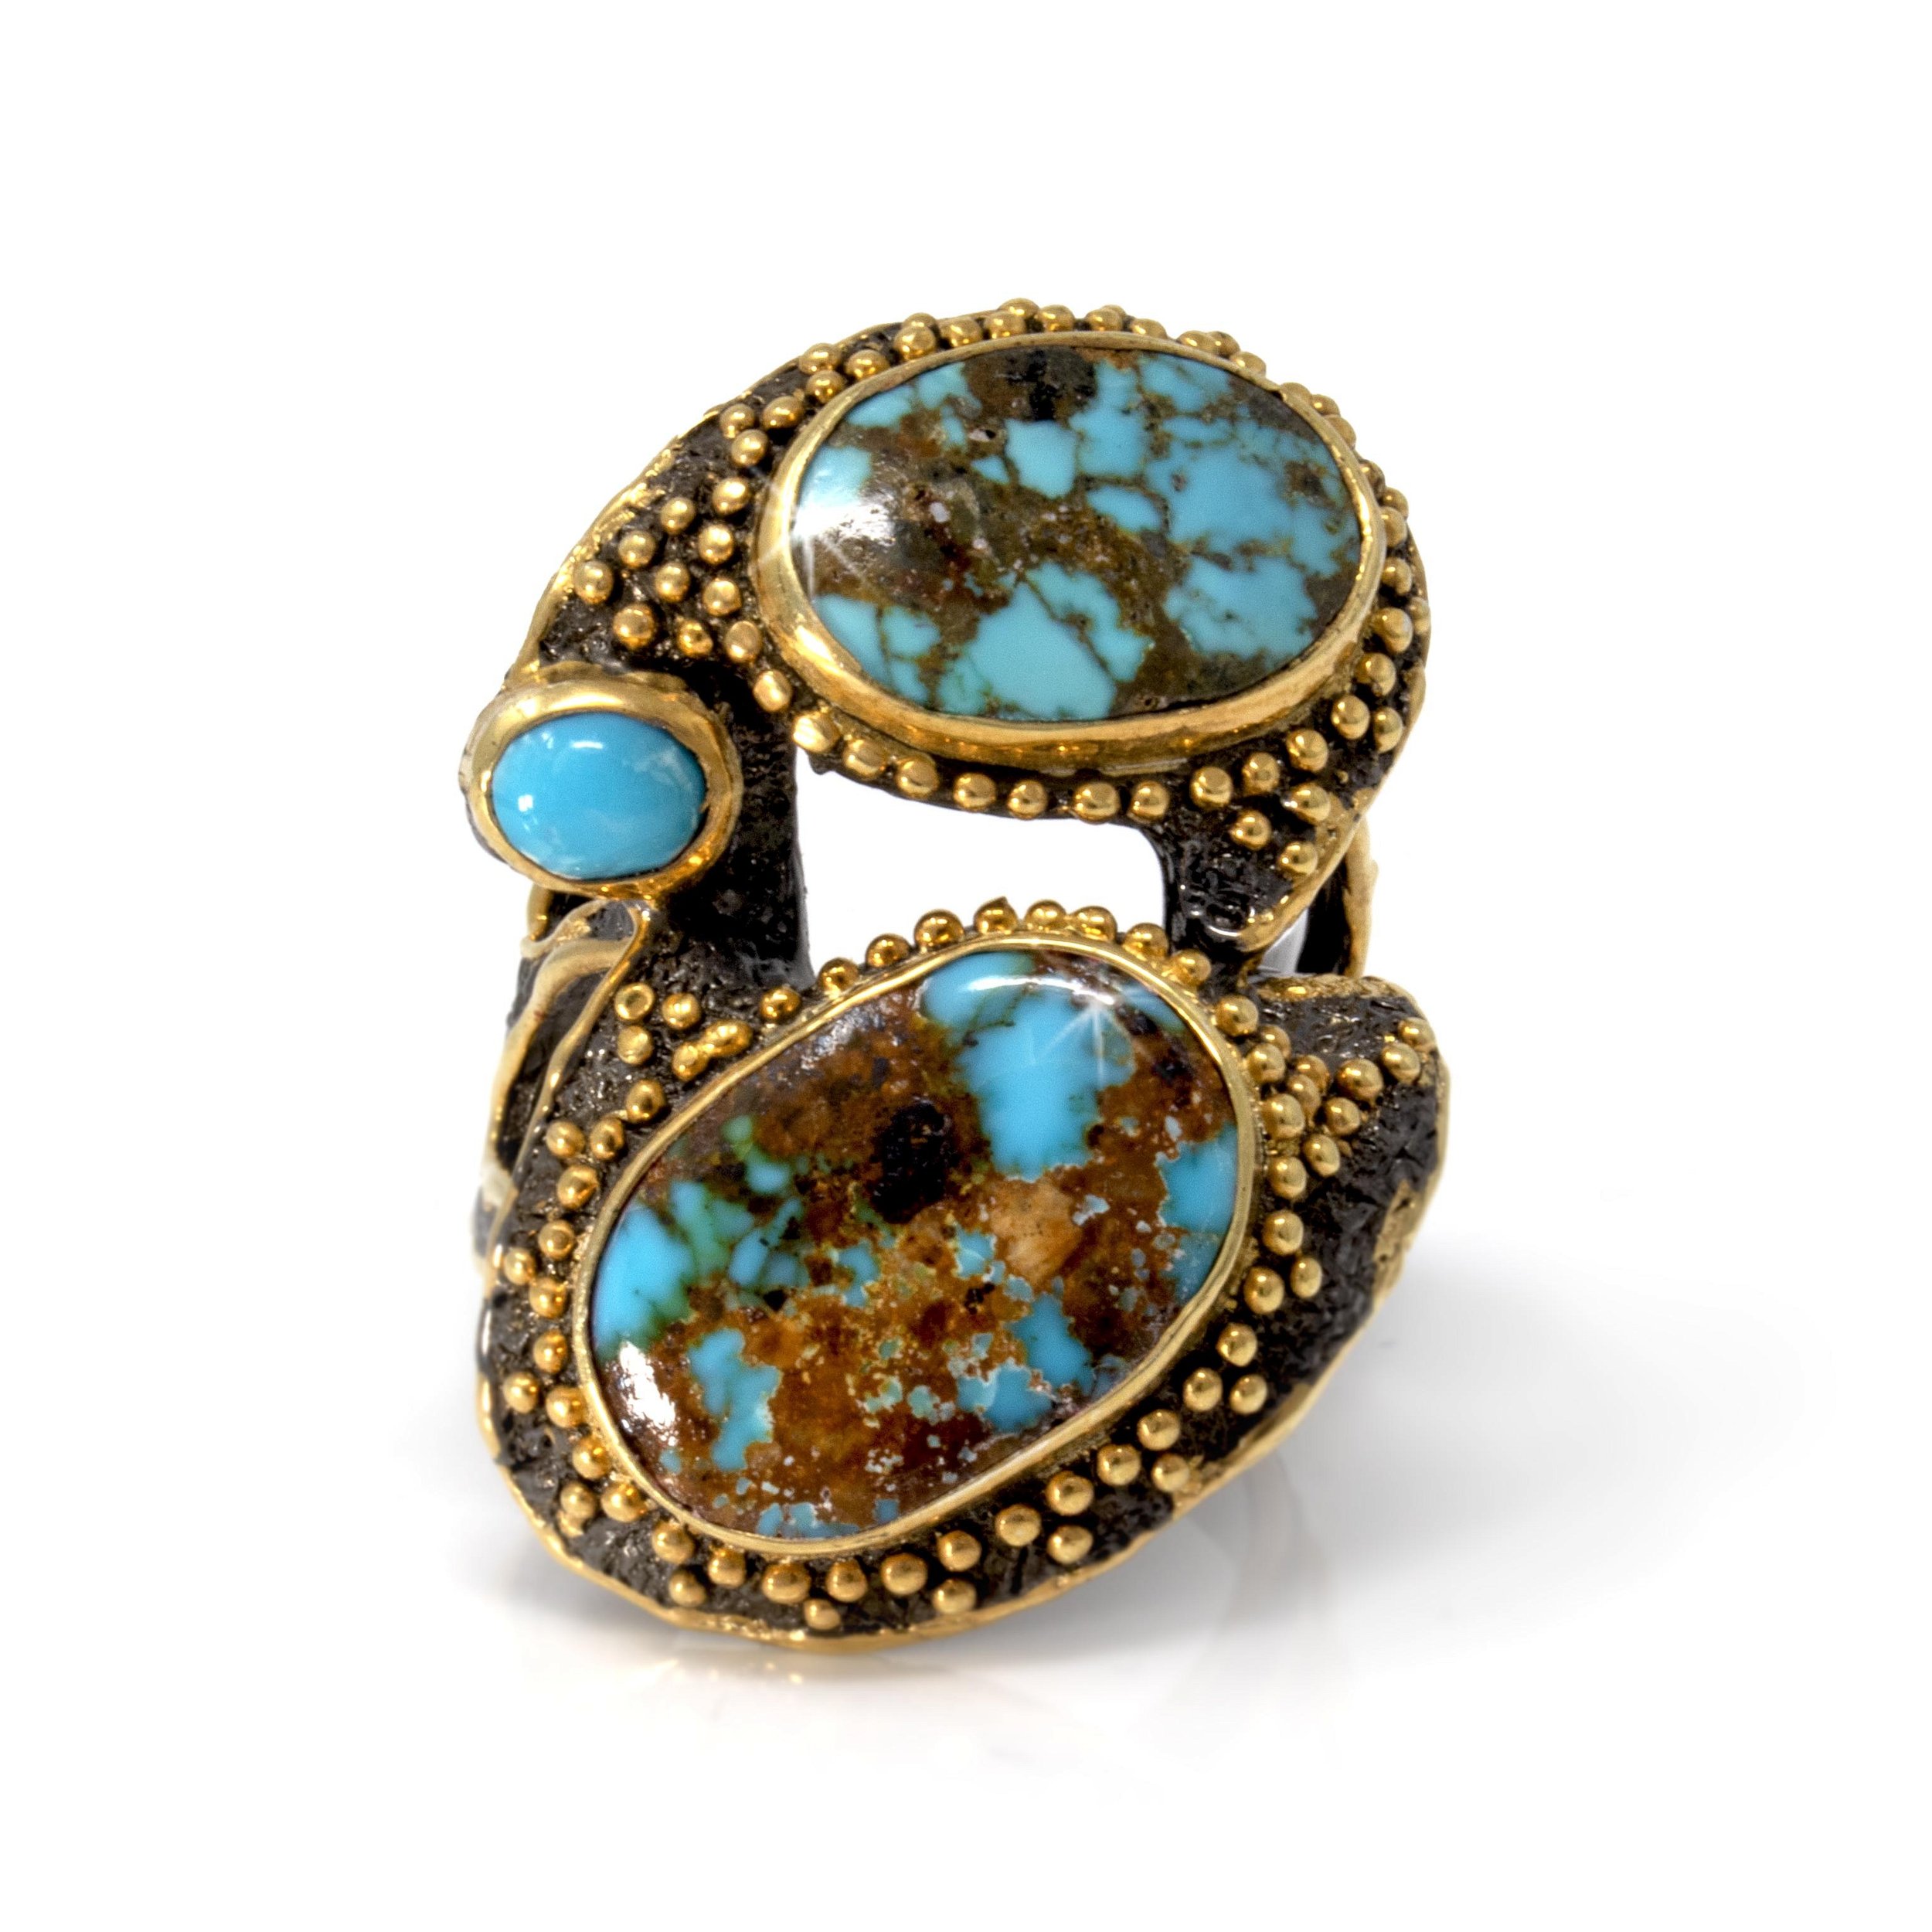 Persian Turquoise Ring Size 7.5 - 3 Ovals With Gold Vermeil Bezels With Beaded Edge Set On Organic Flowing Oxidized Sterling Silver Band With Rounded Cutouts & Gold Vermeil Detailing